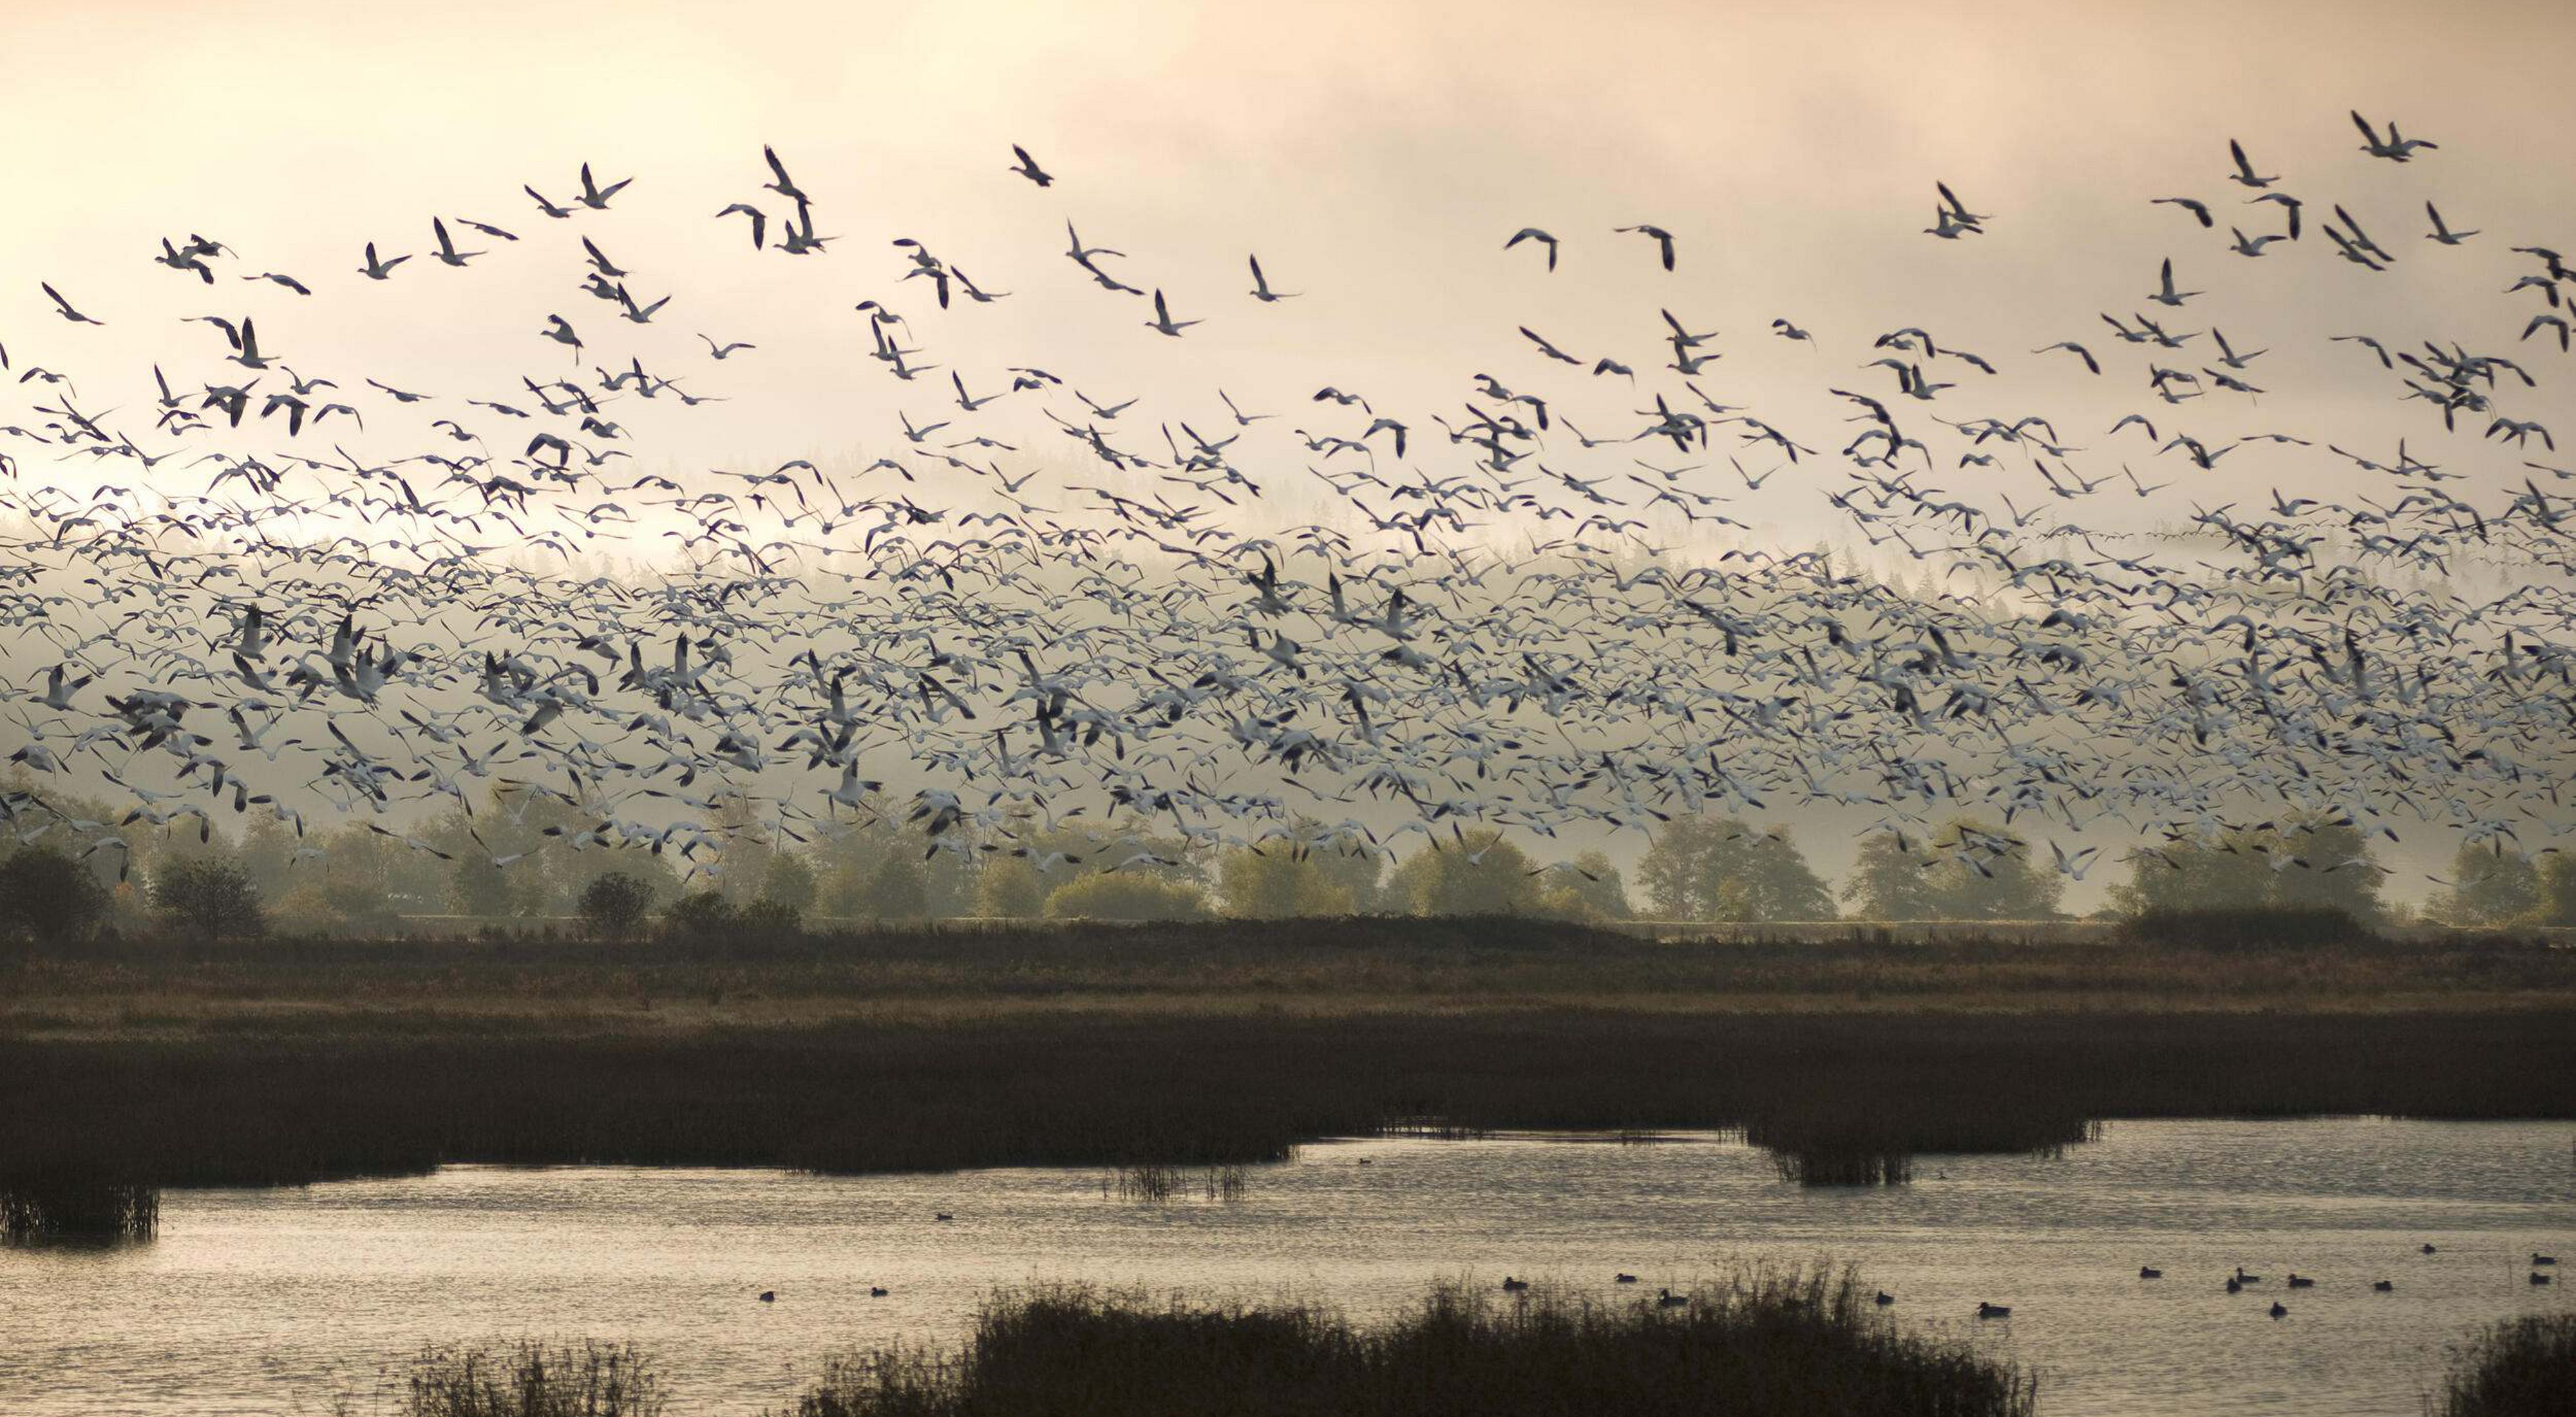 A dense flock of birds flies over a body of water at sunset.